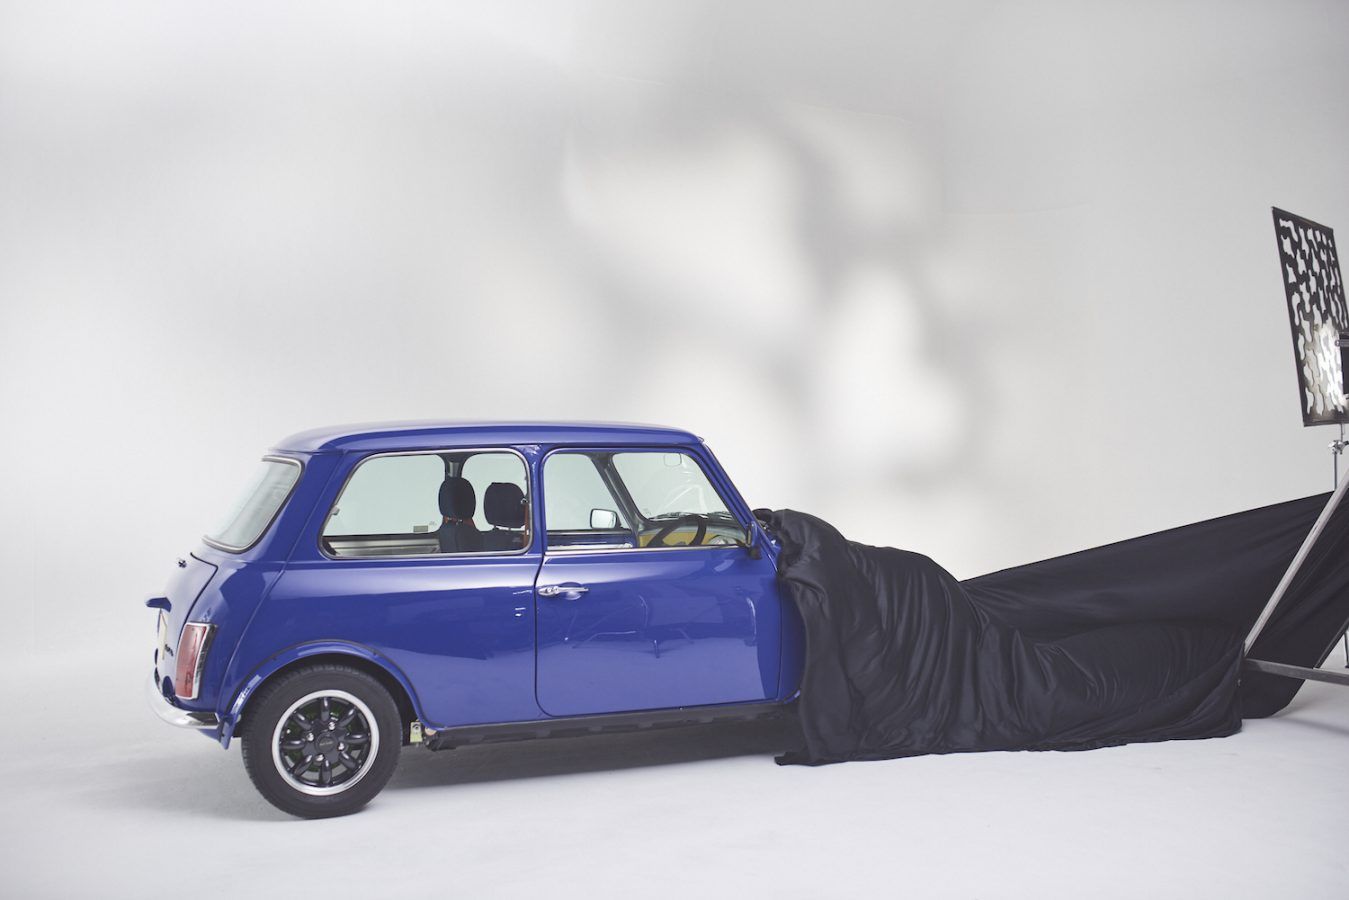 Paul Smith Teams Up with MINI to Release a Sustainable, Electric Vehicle